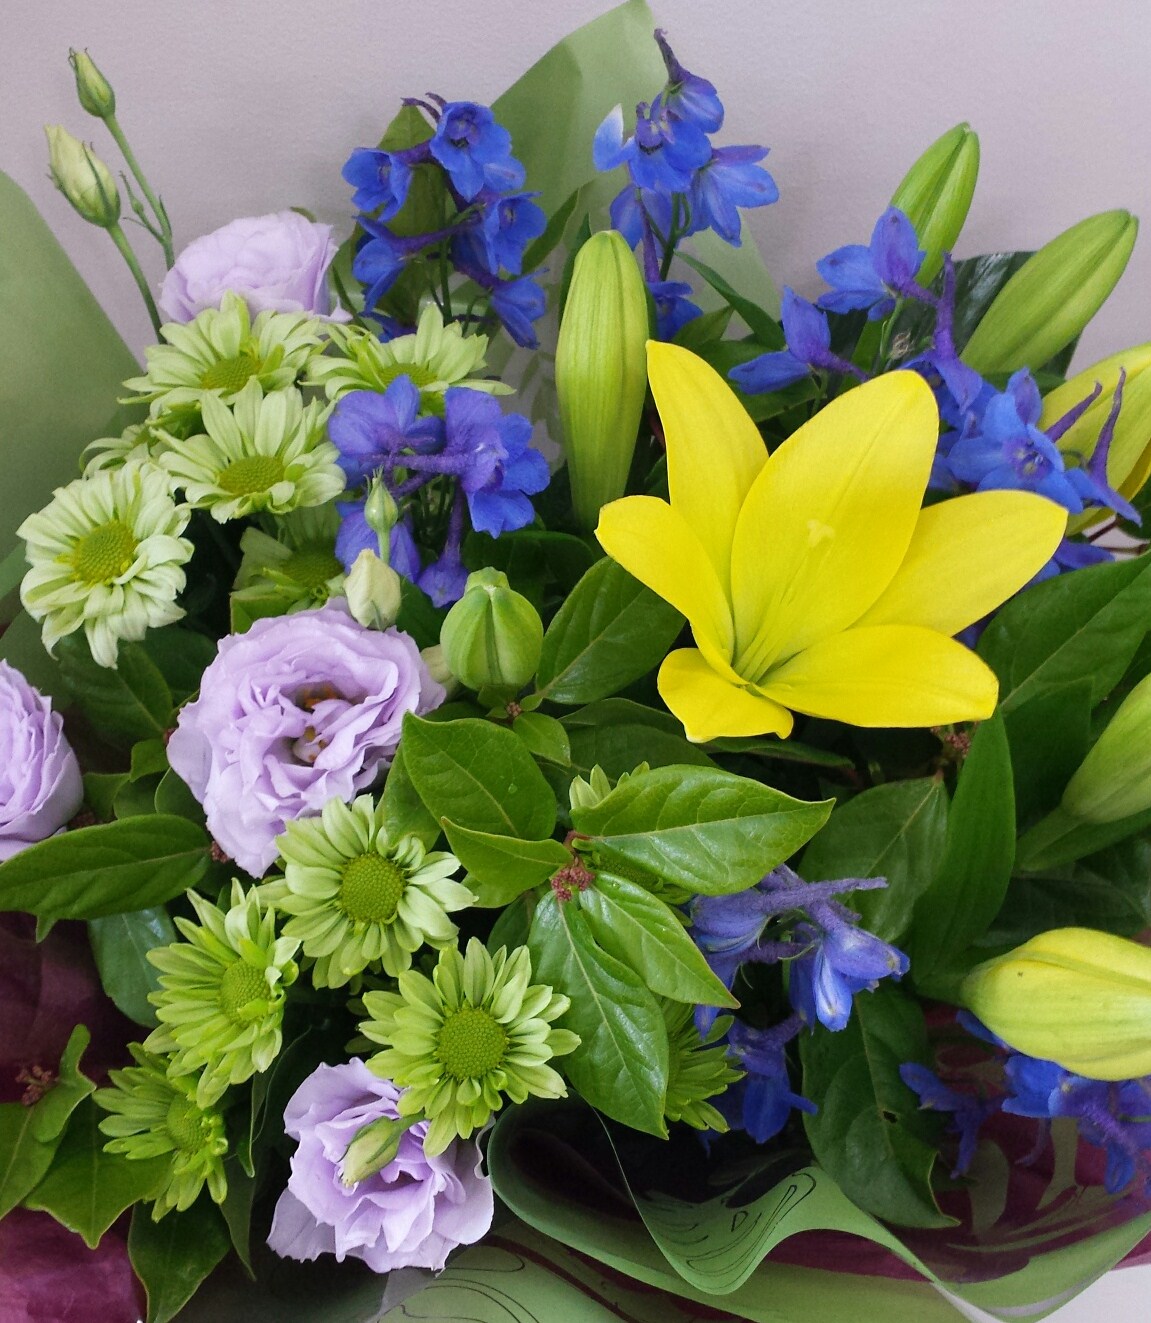 Bright selection of seasonal flowers wrapped to present